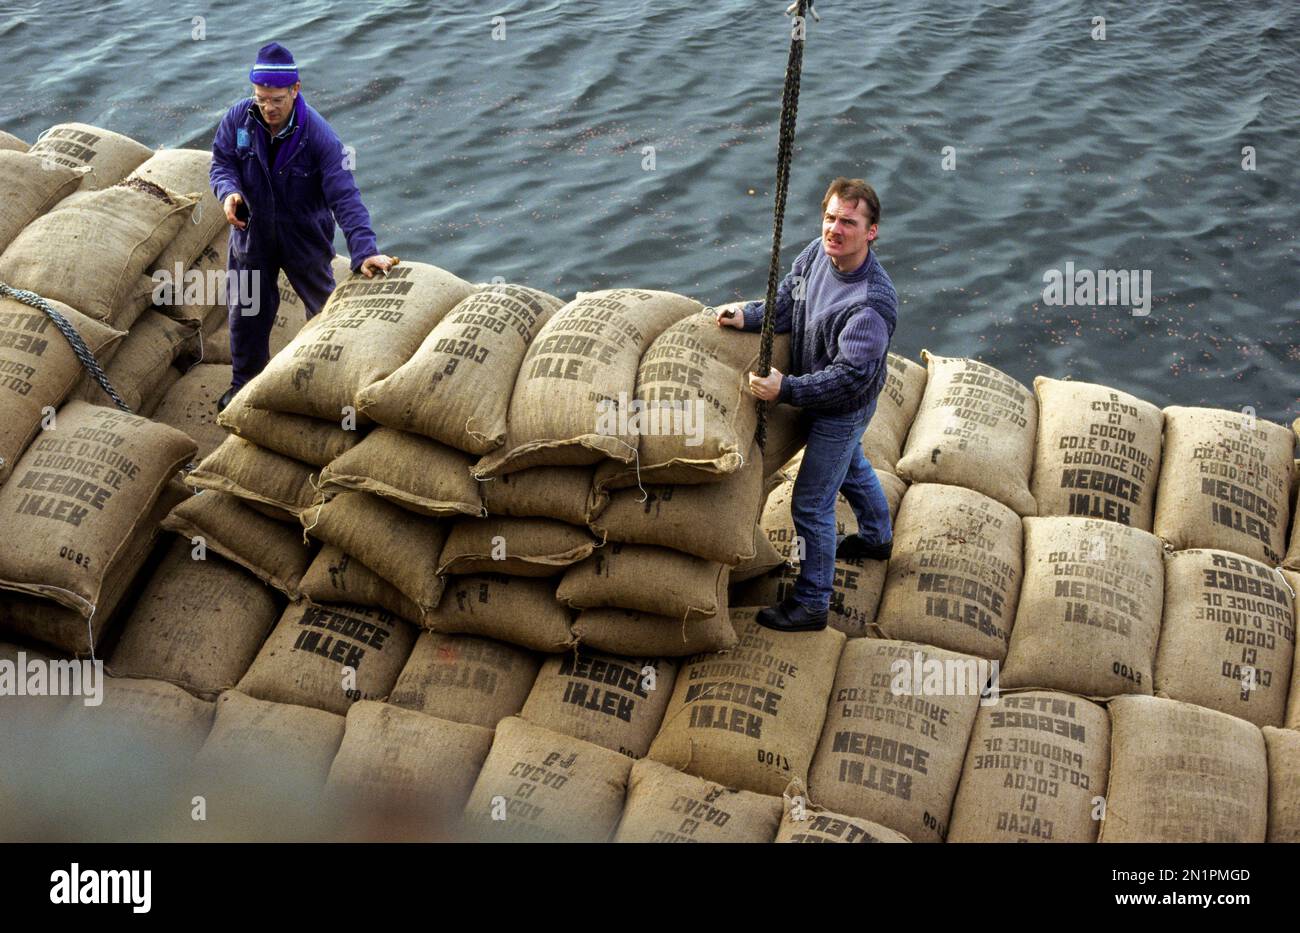 The Netherlands, Amsterdam. Loading cocoa into a ship. Stock Photo